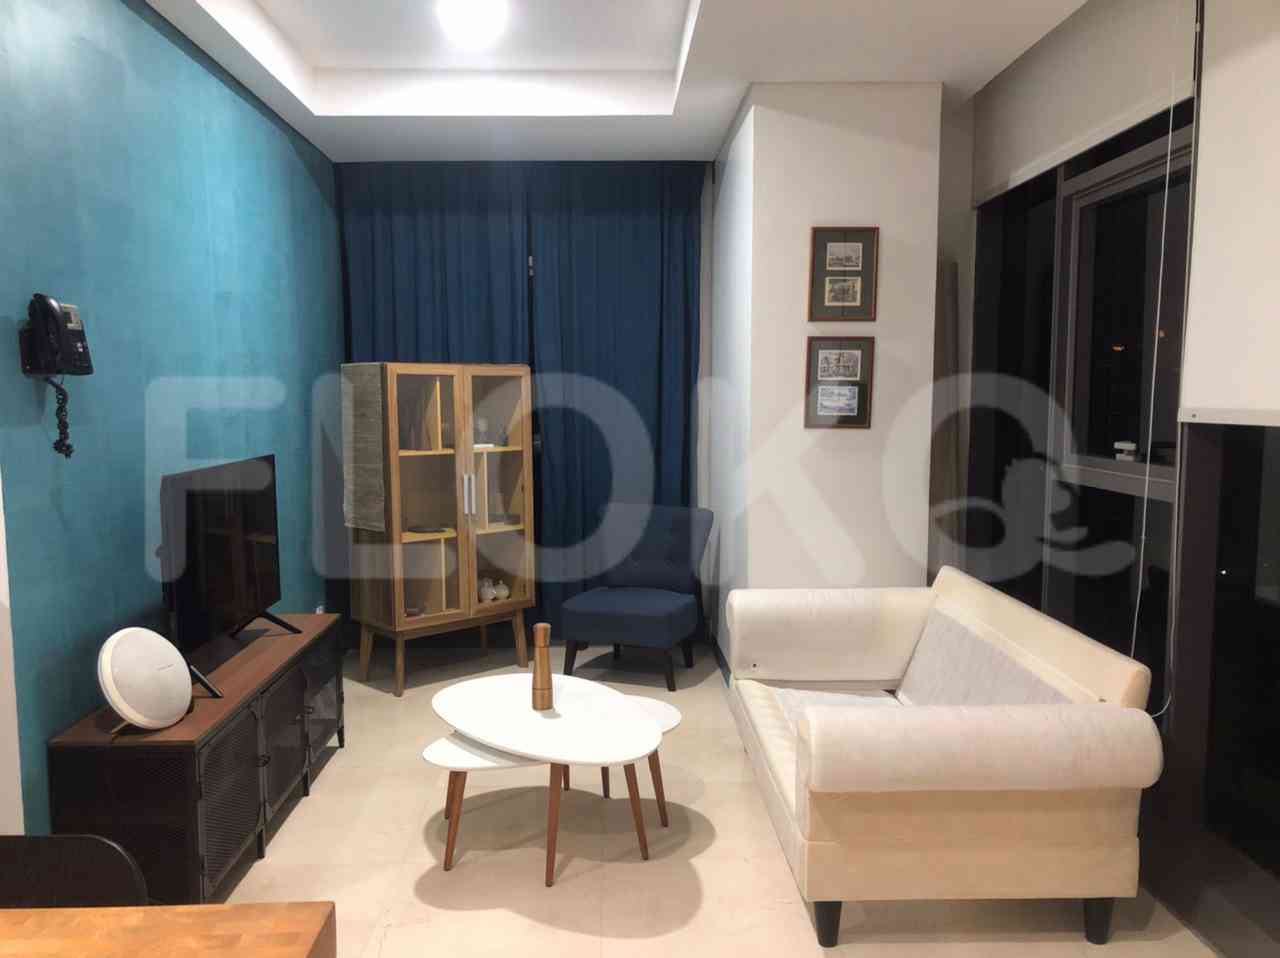 2 Bedroom on 10th Floor for Rent in Lavanue Apartment - fpa157 1